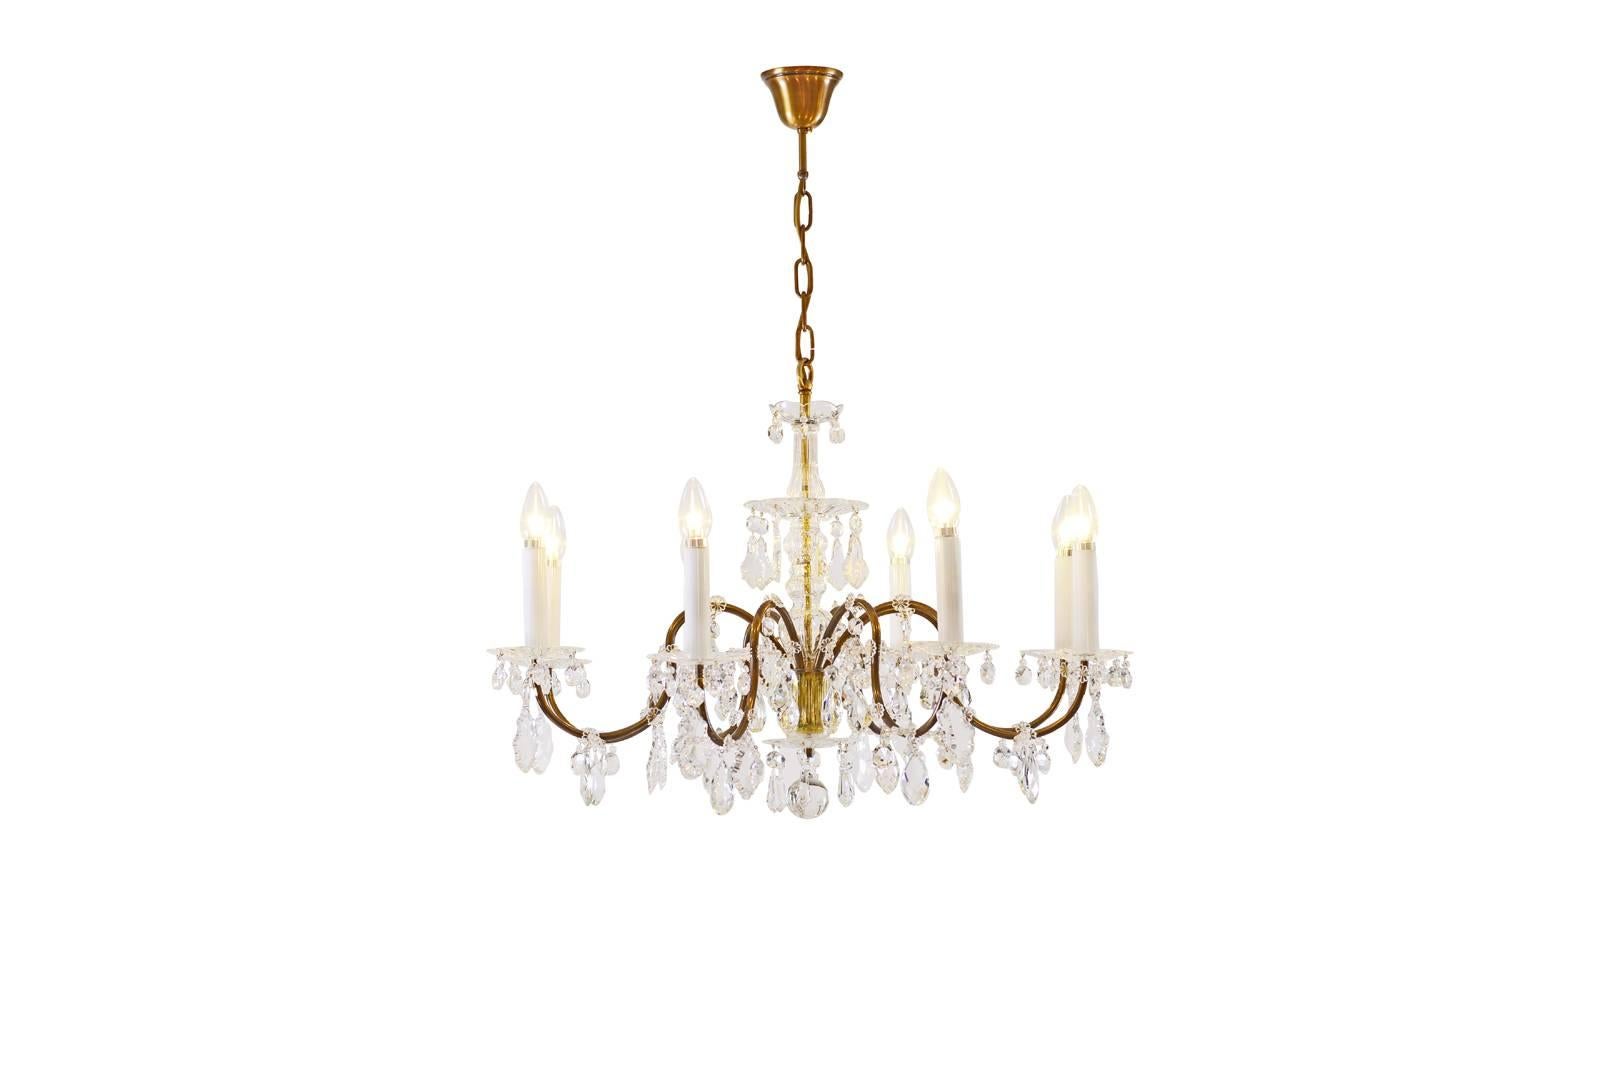 A beautiful and elegant Lobmeyr chandelier with rich hangings and a natural patina, the given height is just the chandelier with no suspension. Eight flames.